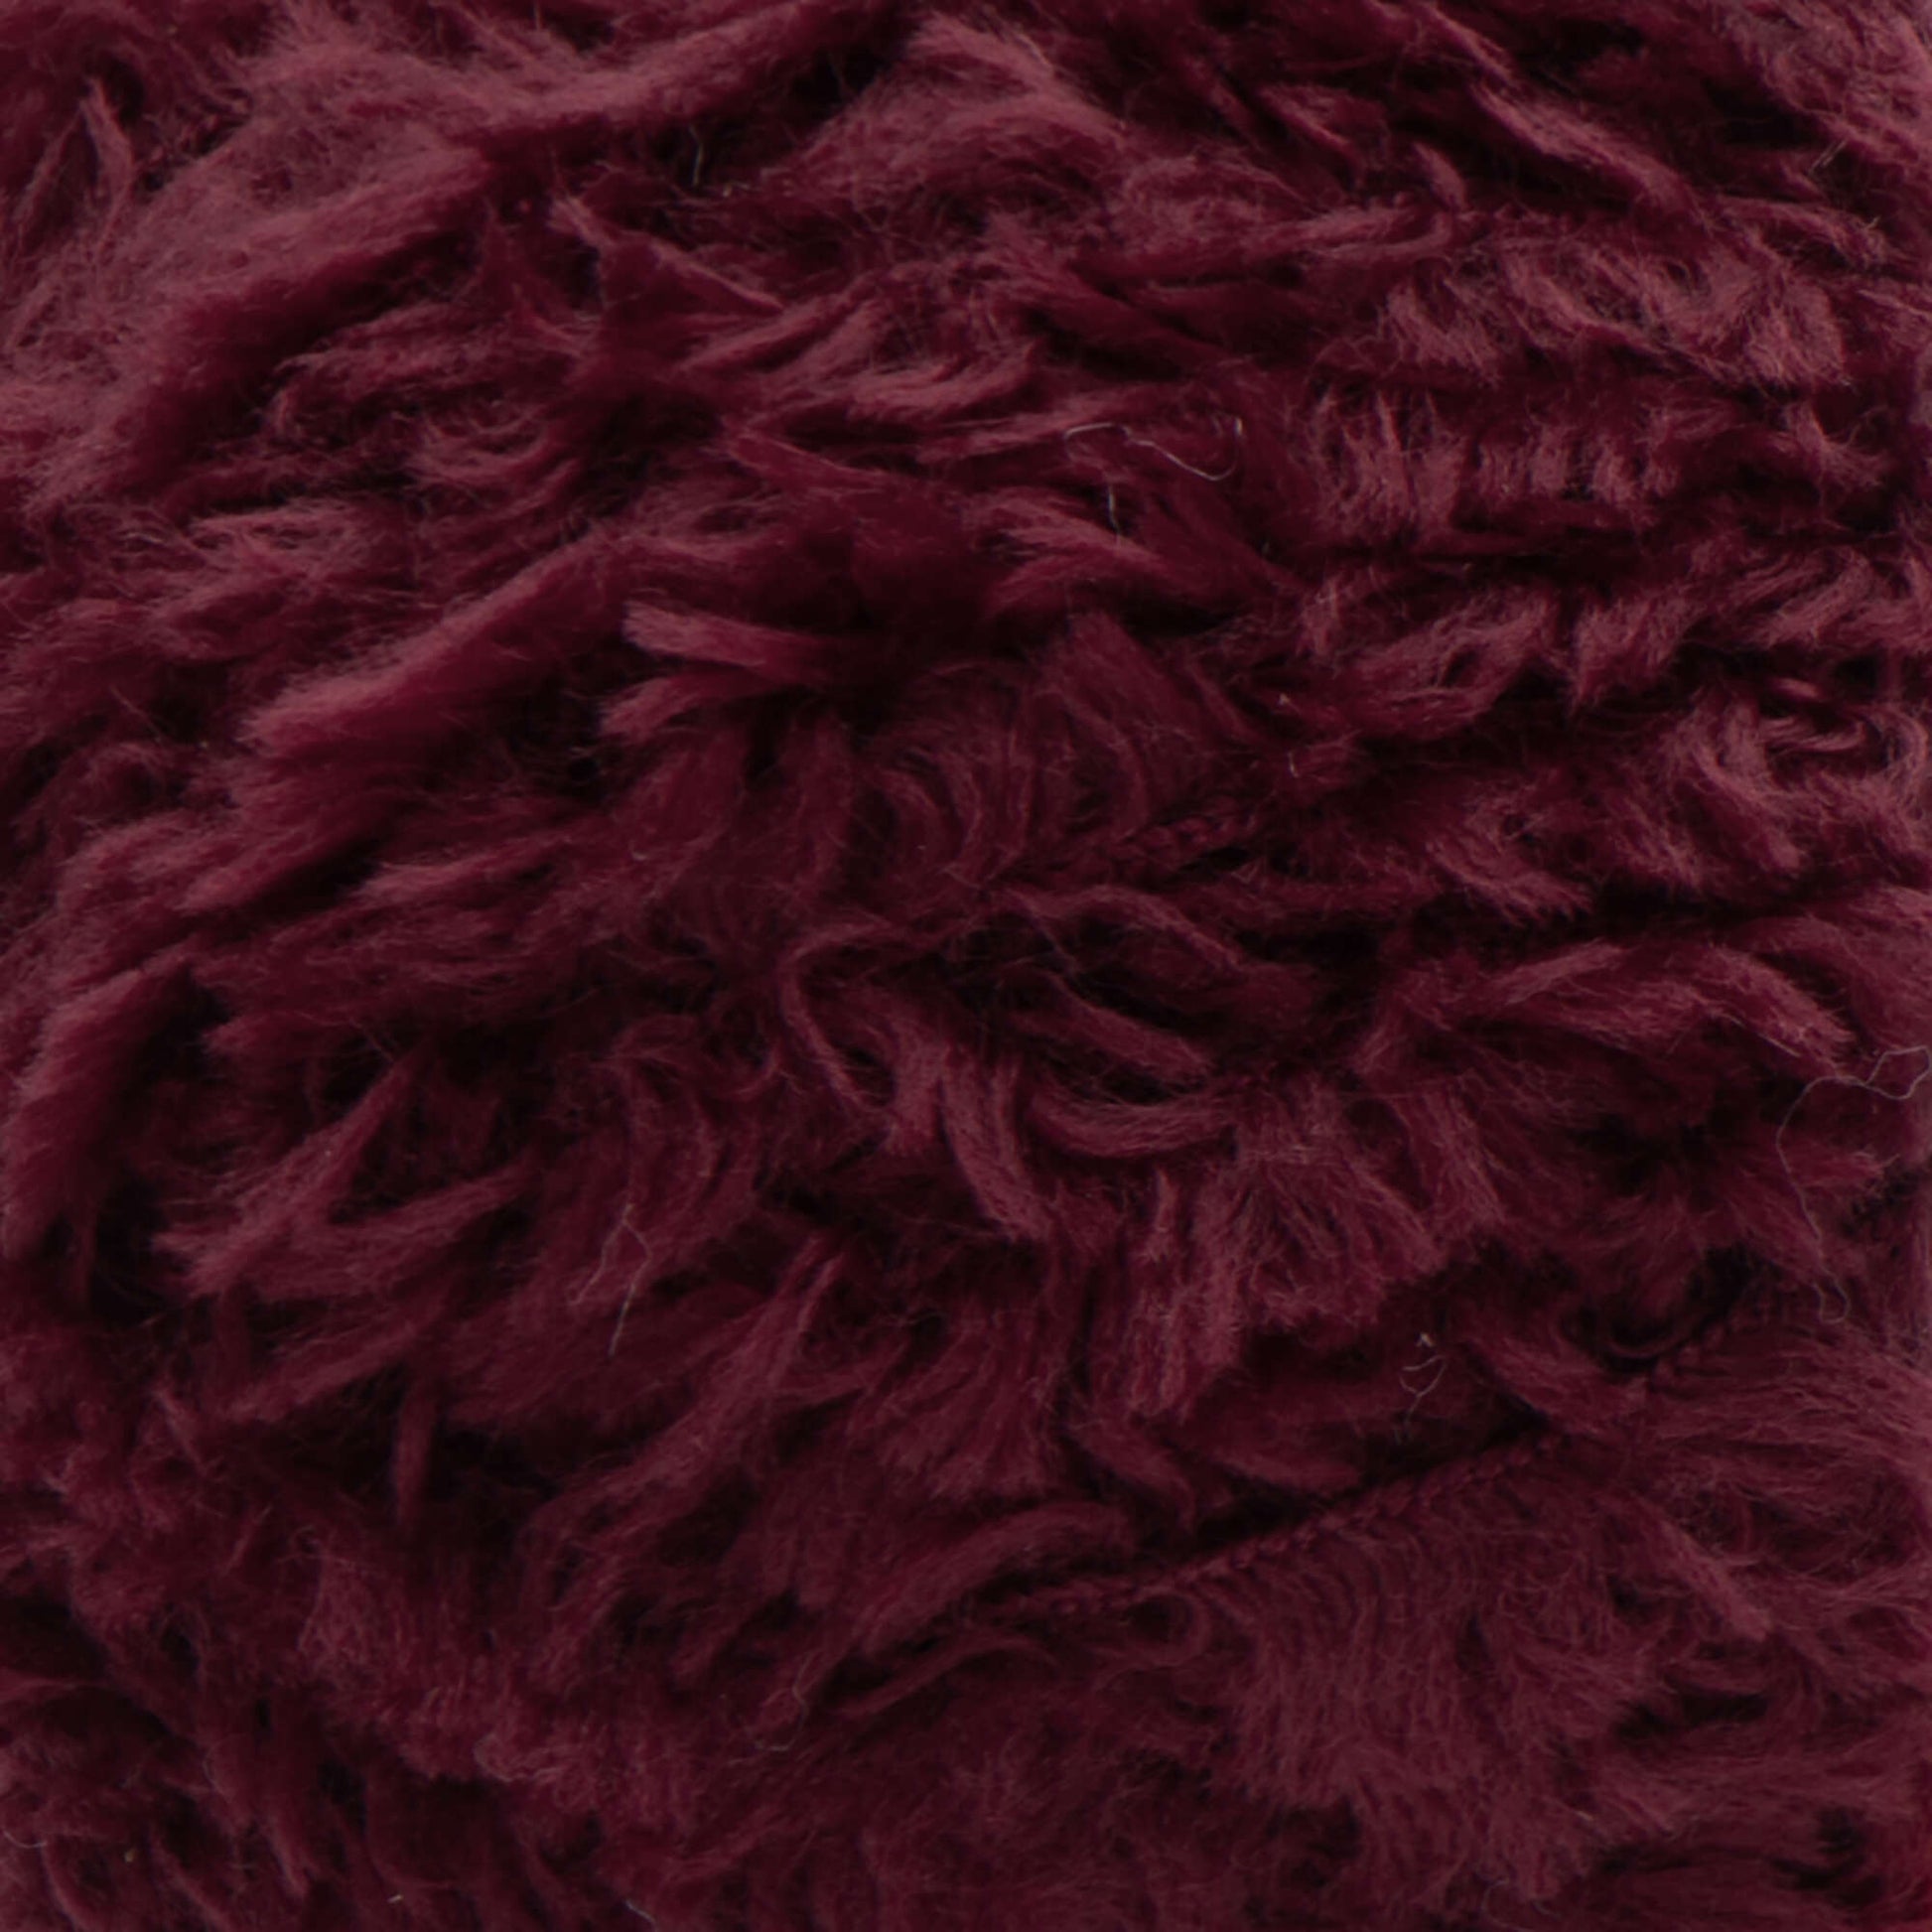 Red Heart Hygge Fur Yarn - Discontinued shades Sangria